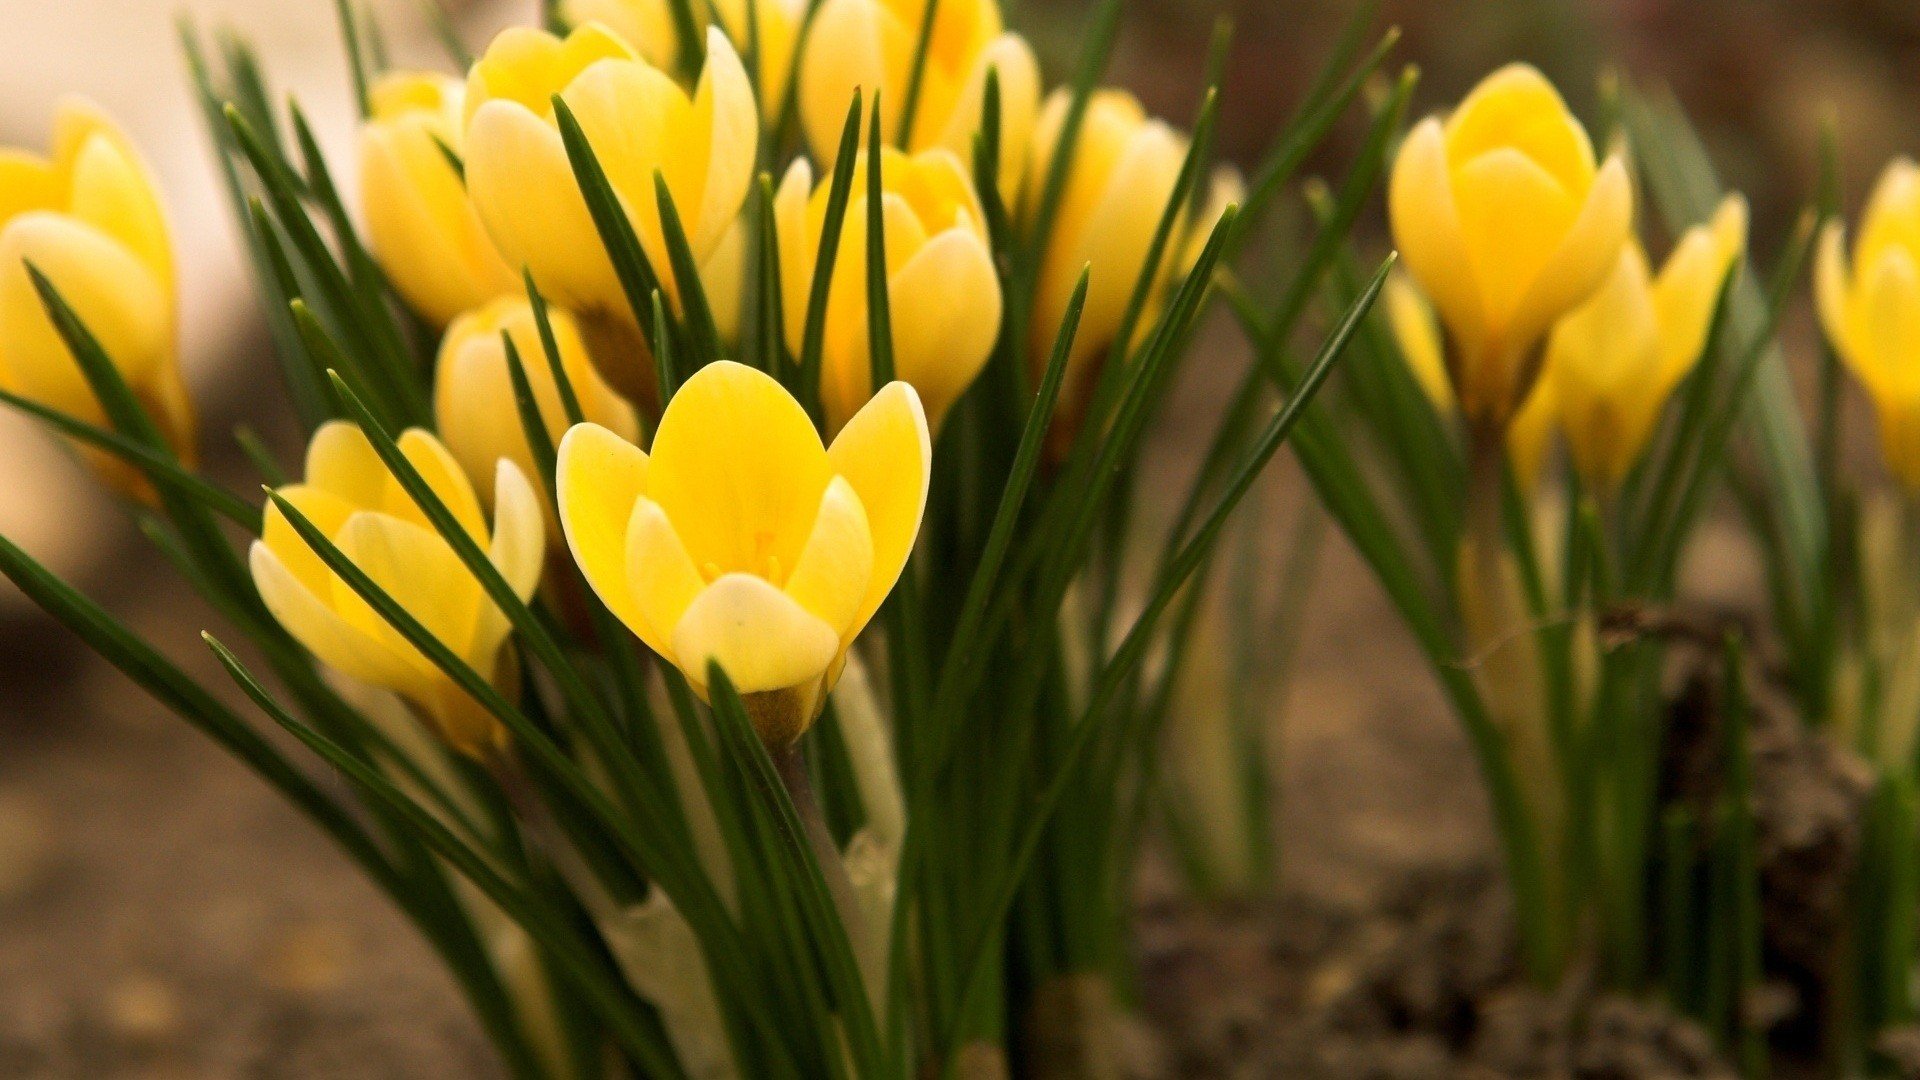 landscapes, Nature, Tulips, Yellow, Flowers Wallpaper